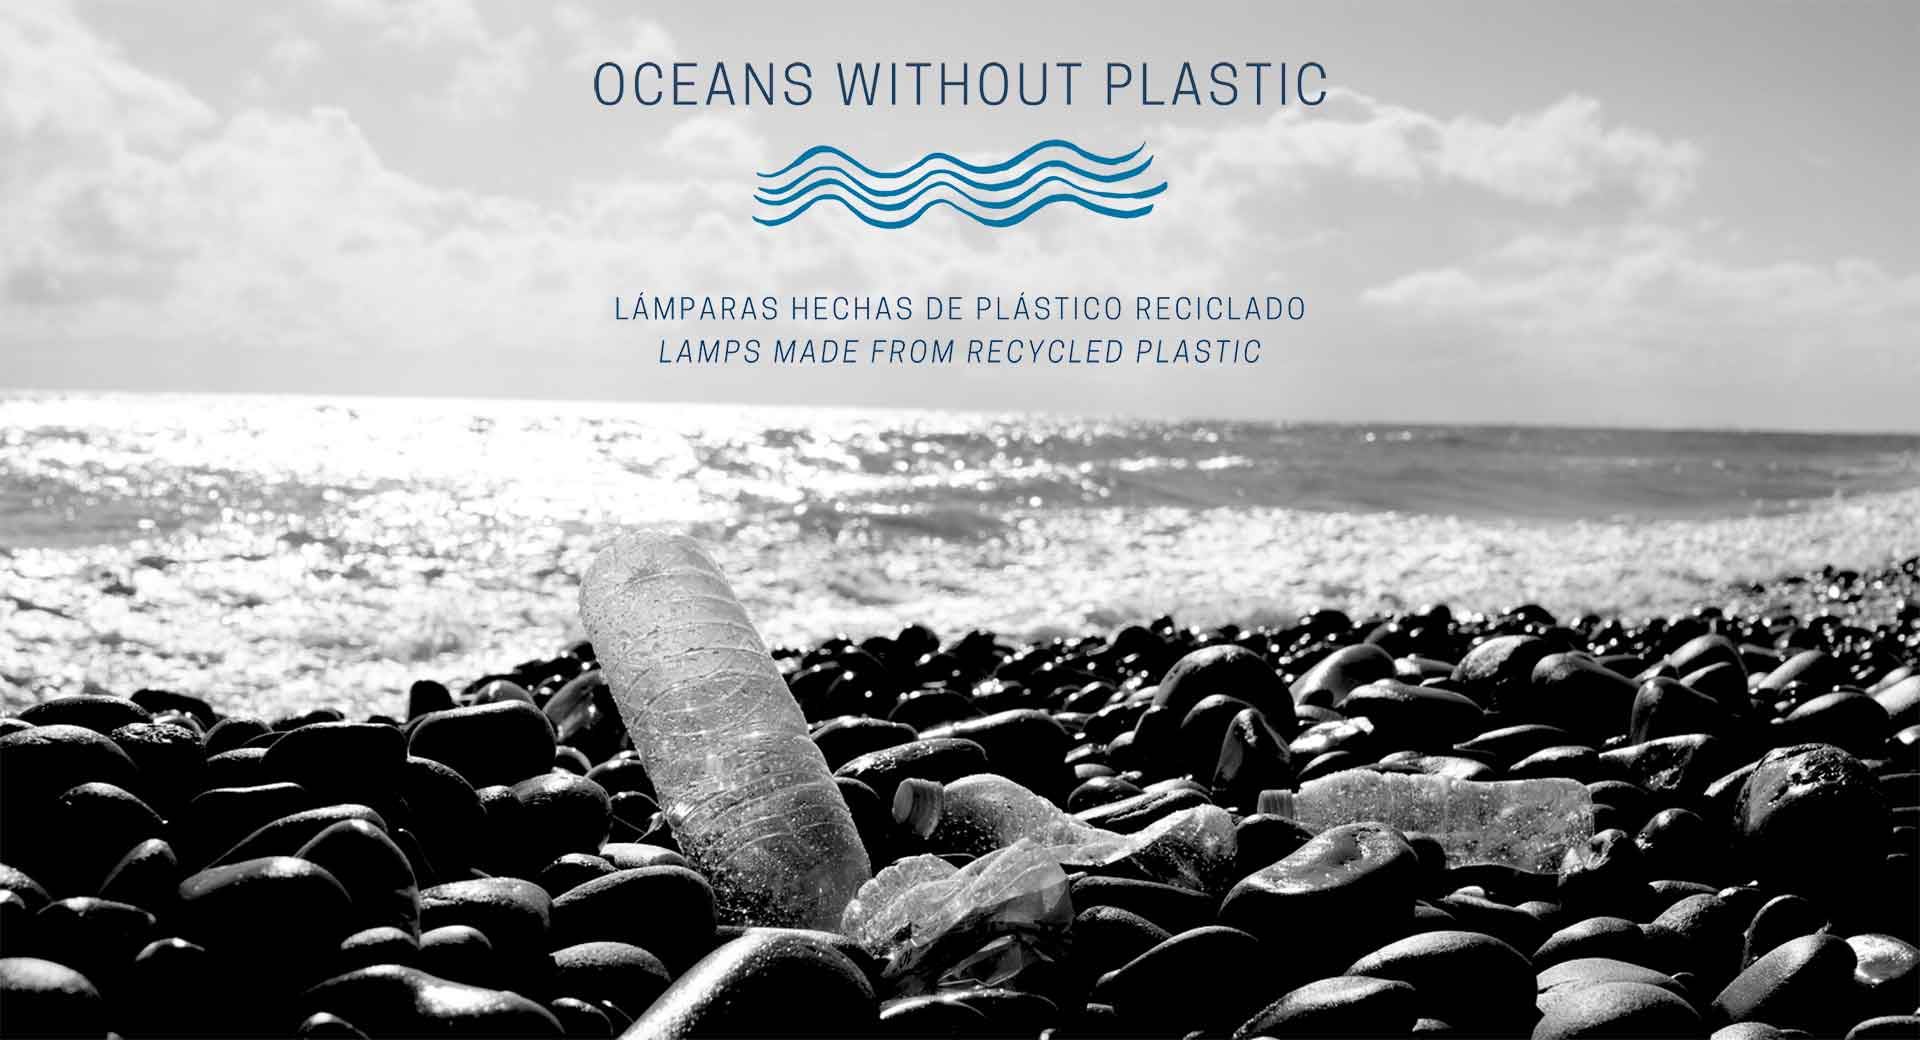 Oceans without plastic